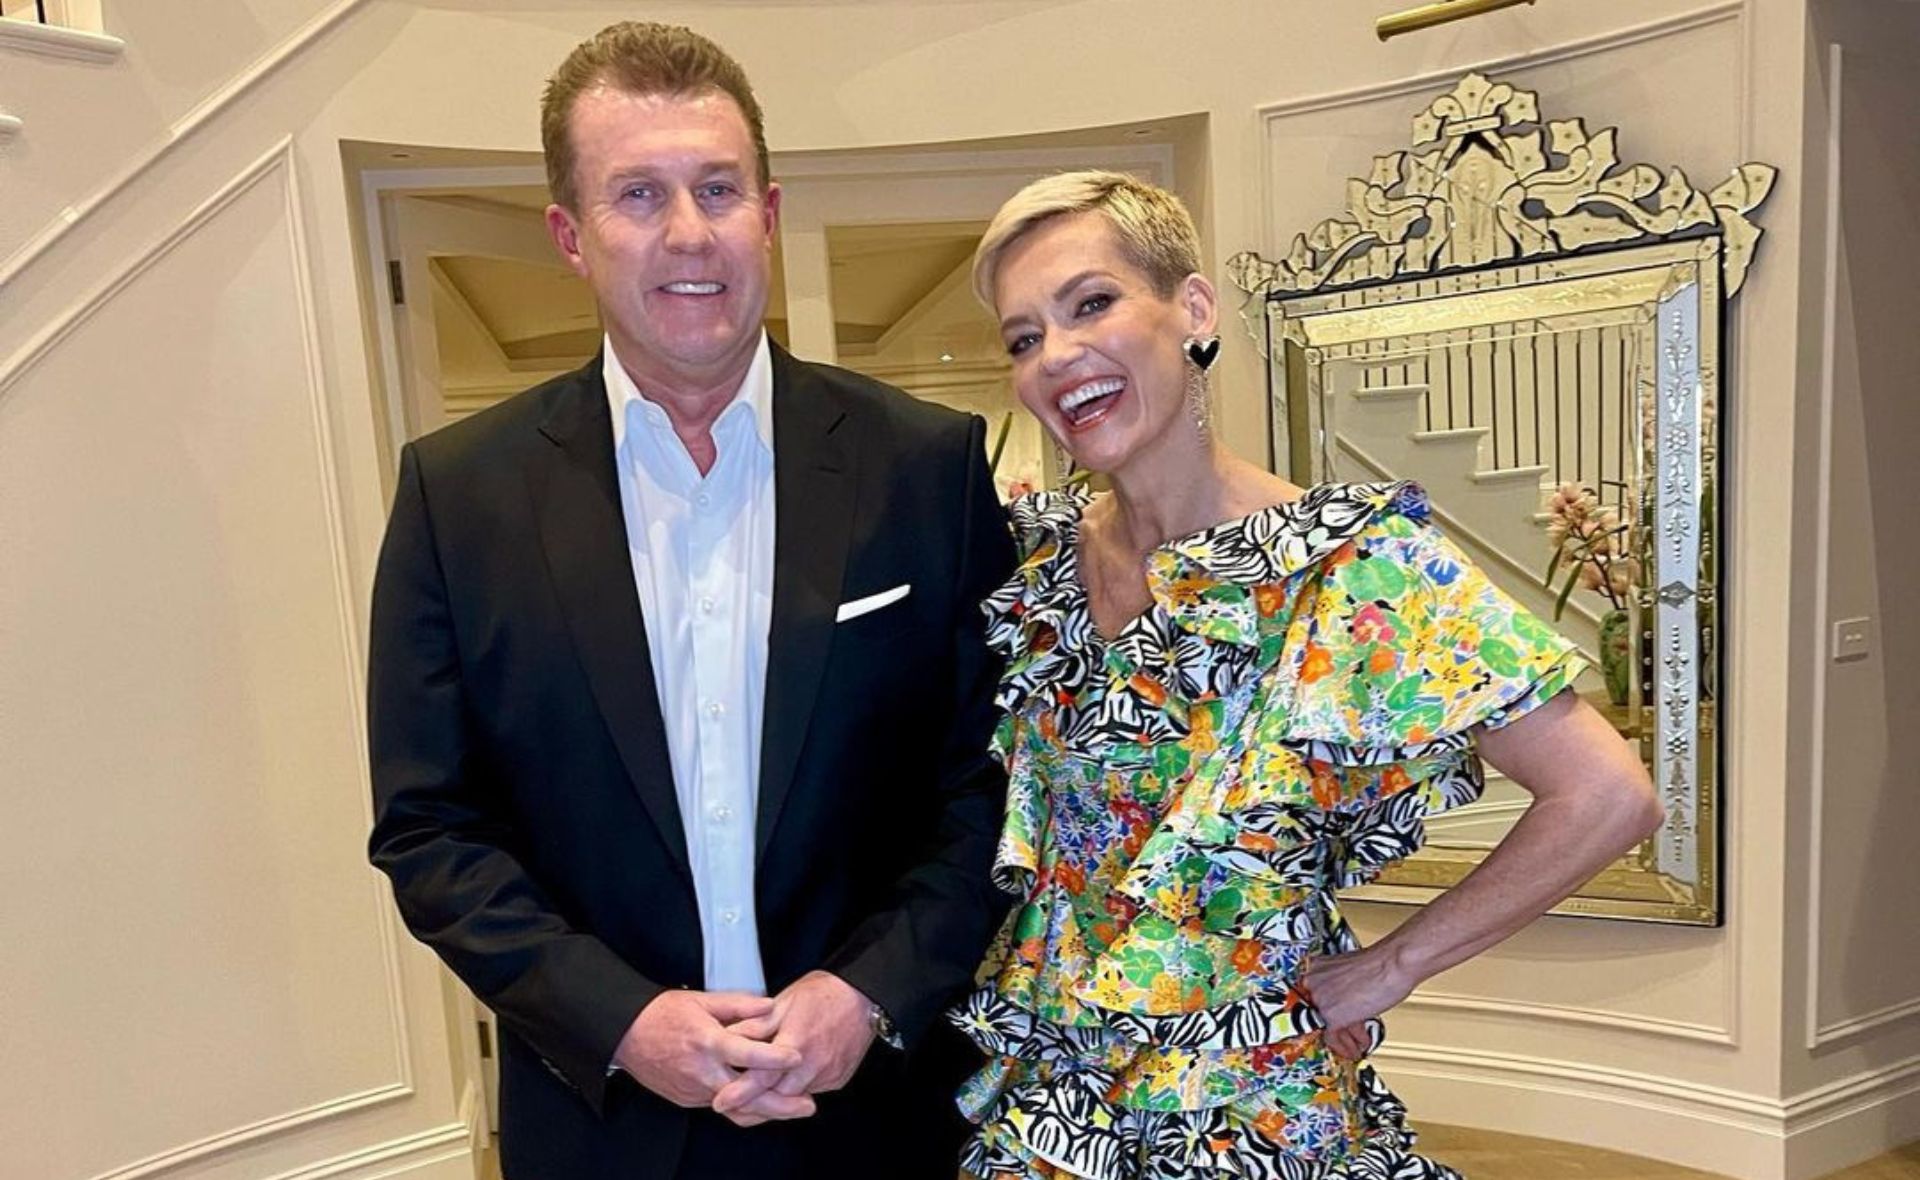 “Pete is a little concerned”: Jessica Rowe’s relatable confession delights fans as she makes a big change